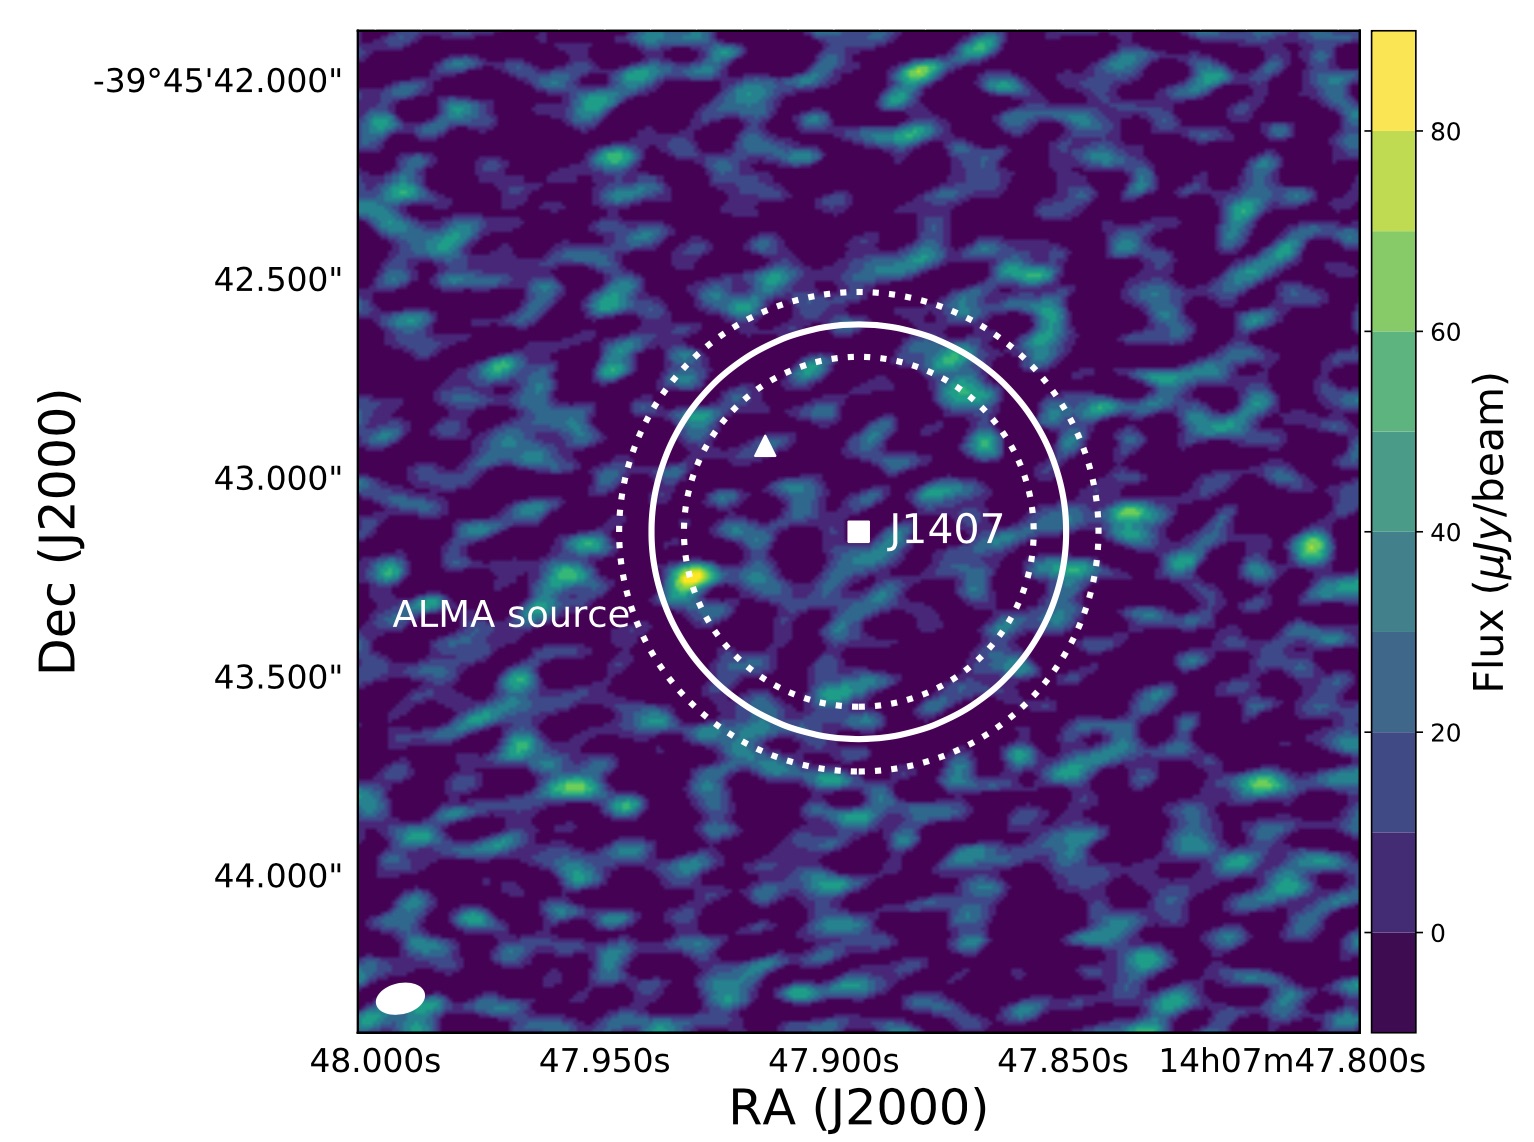 ALMA source detection towards the young star J1407